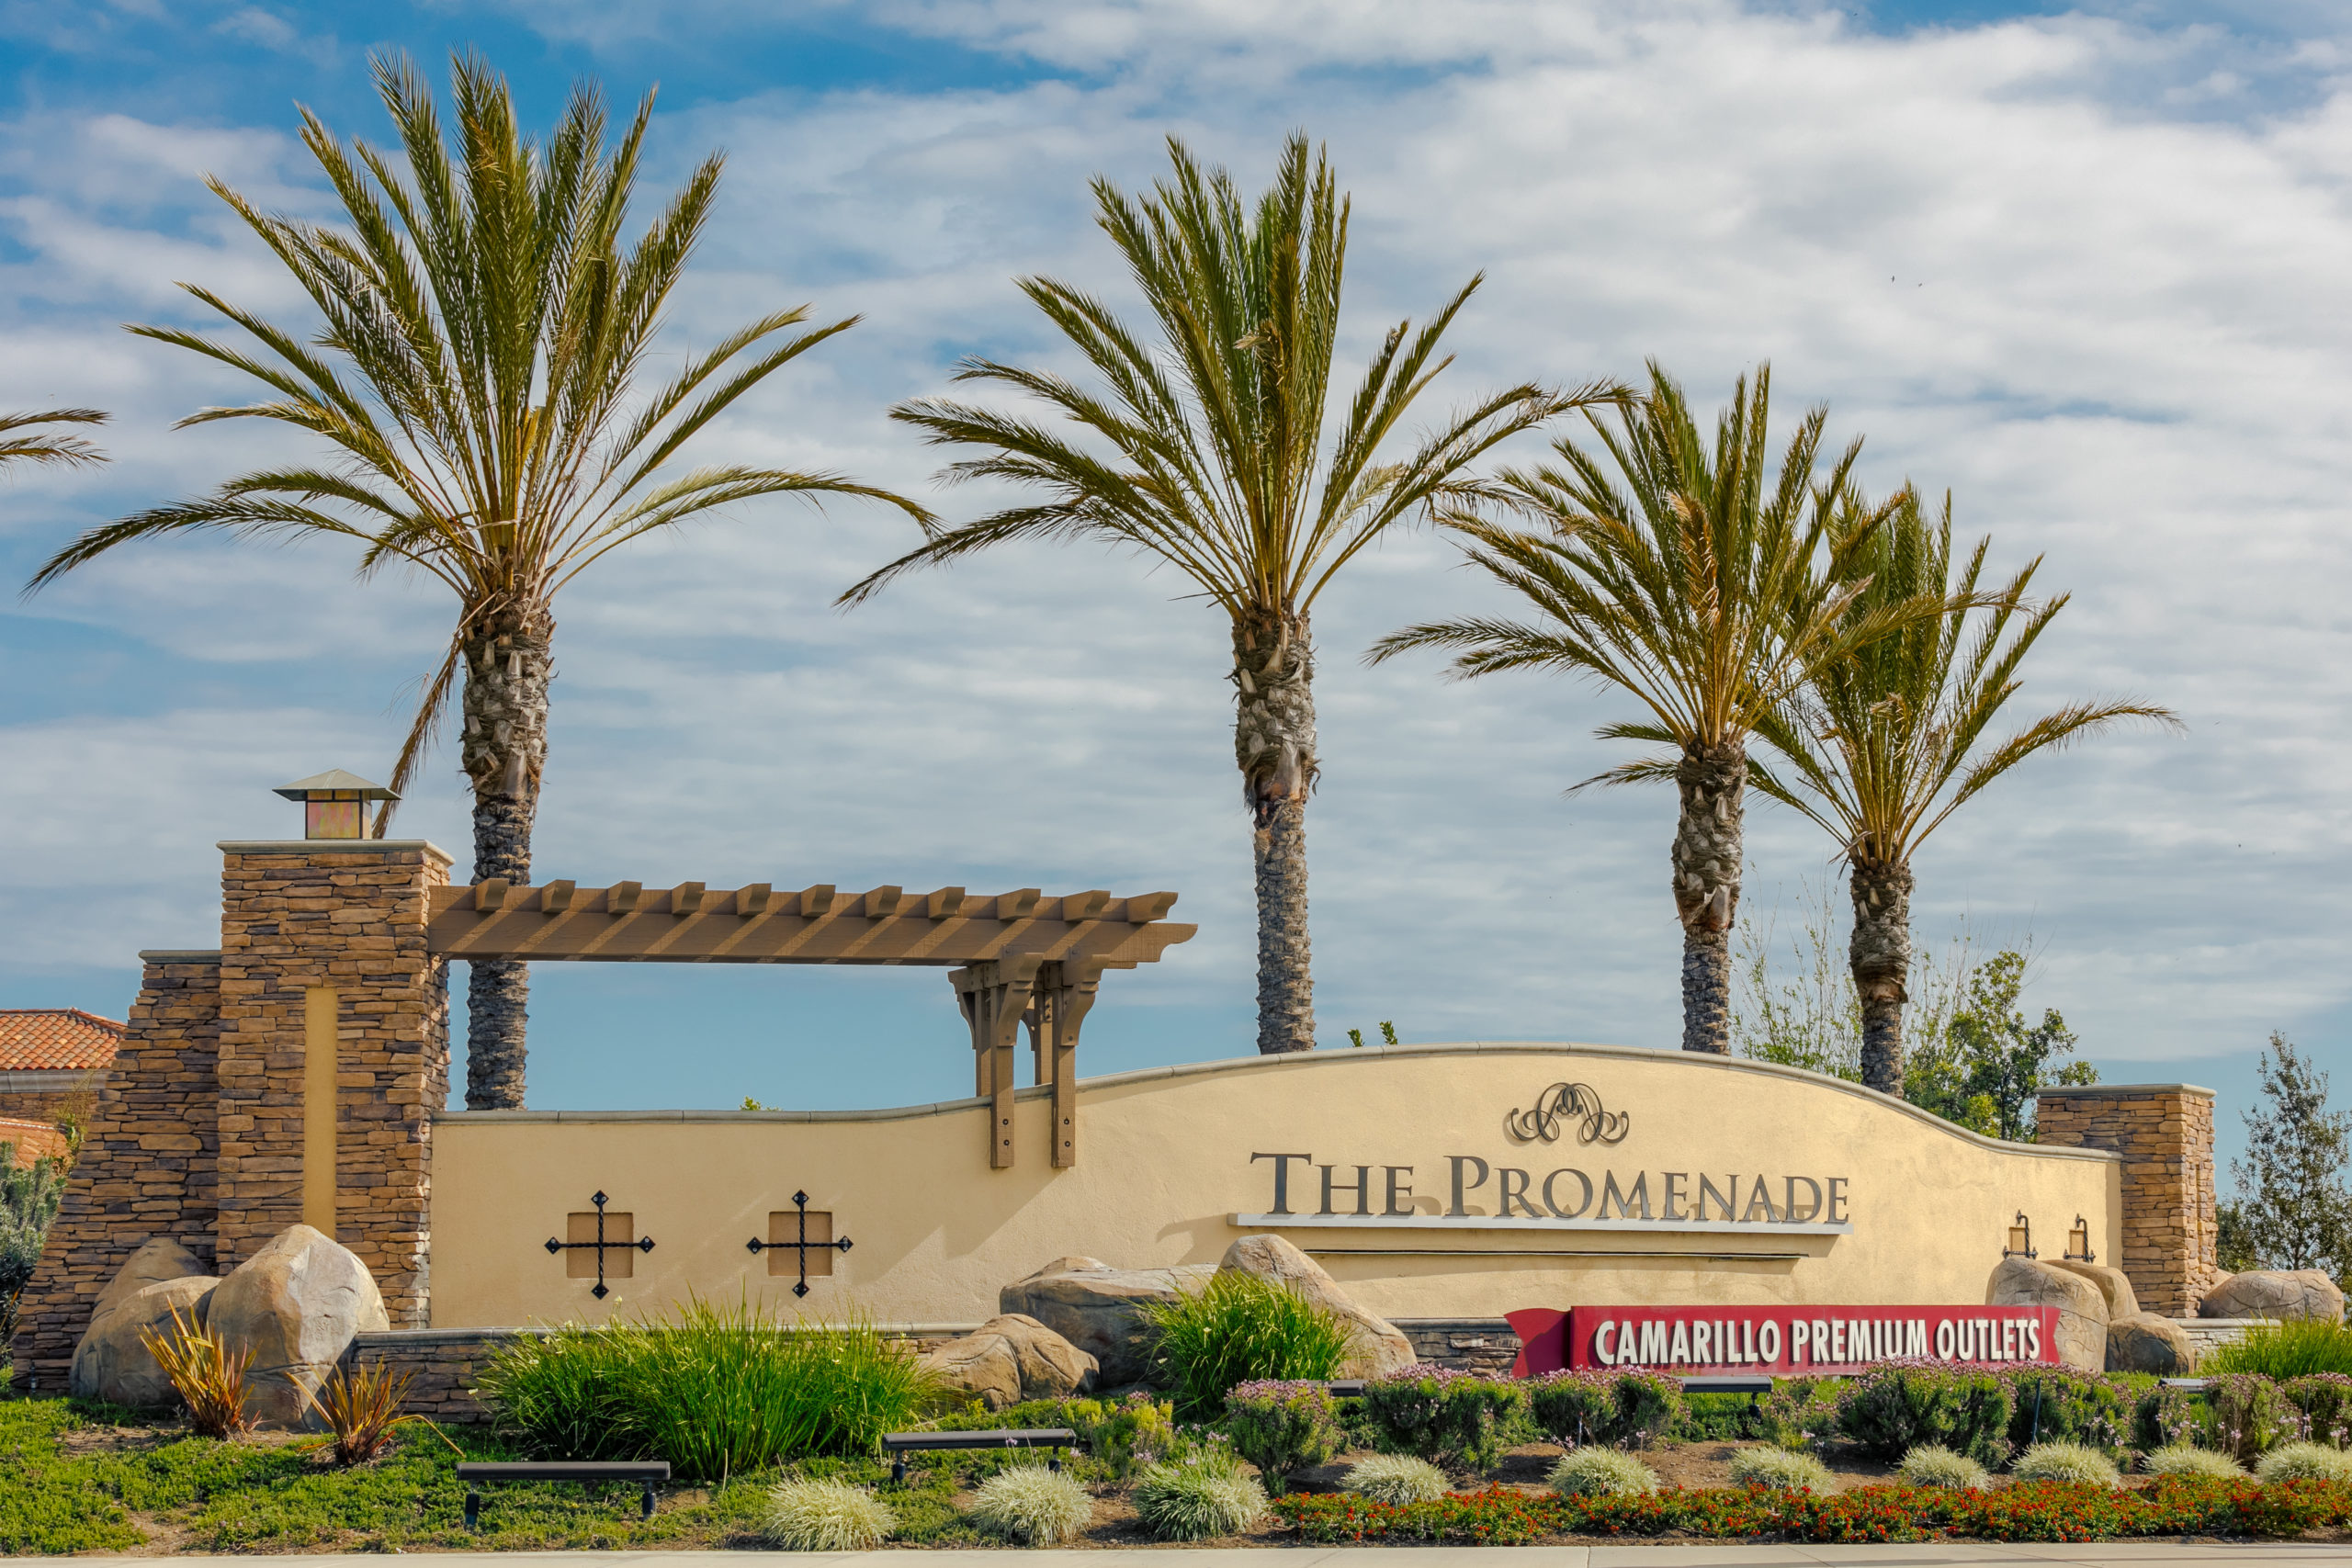 The Camarillo Premium Outlets Are Back and Better than Ever Visit